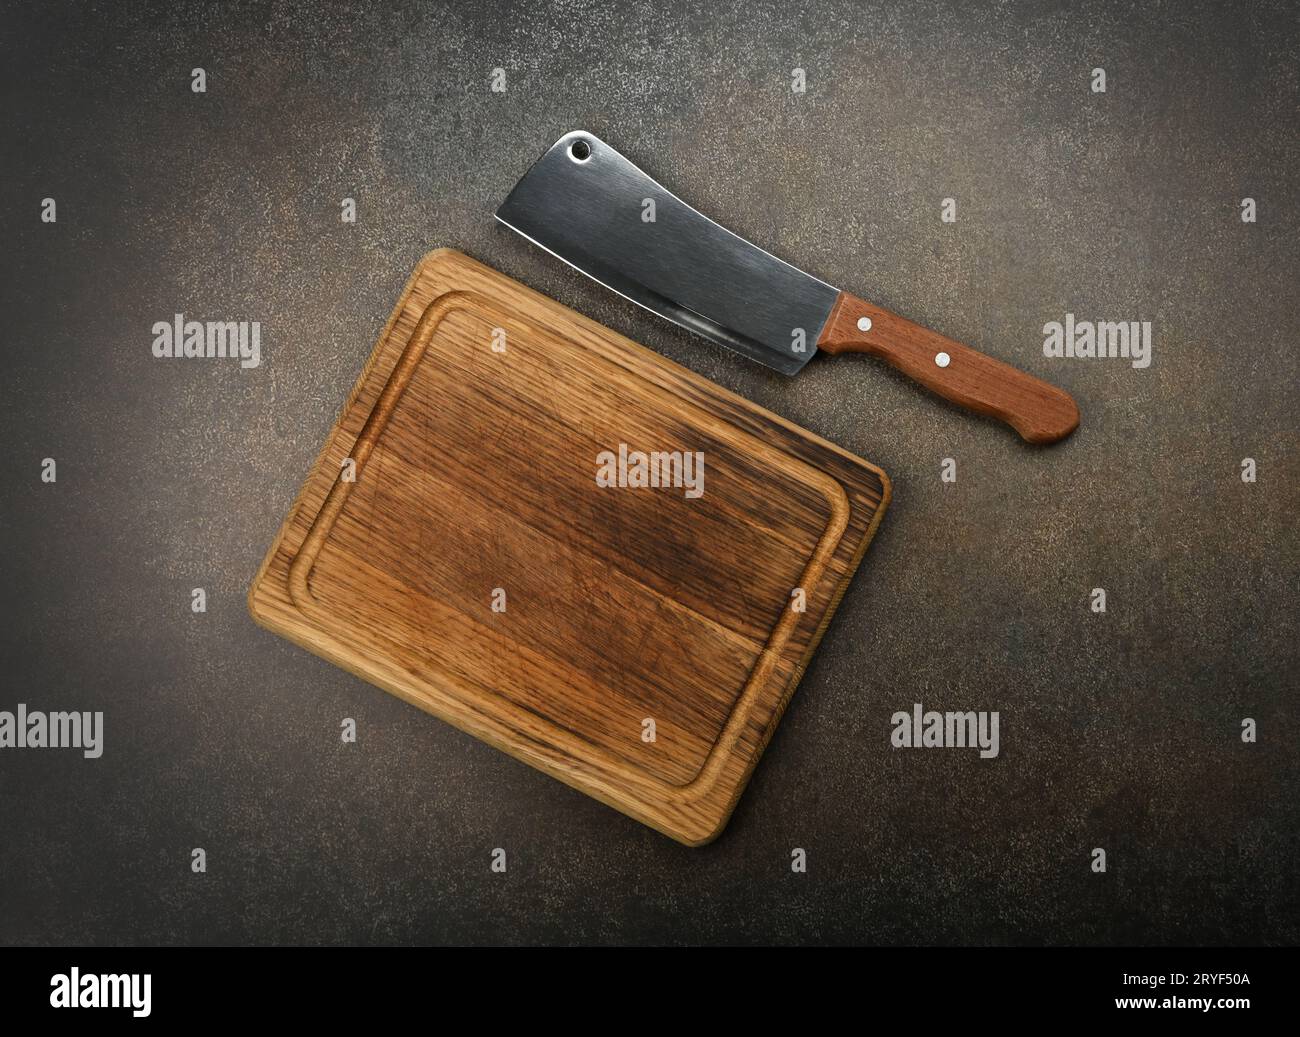 https://c8.alamy.com/comp/2RYF50A/meat-cleaver-and-chopping-board-on-table-2RYF50A.jpg